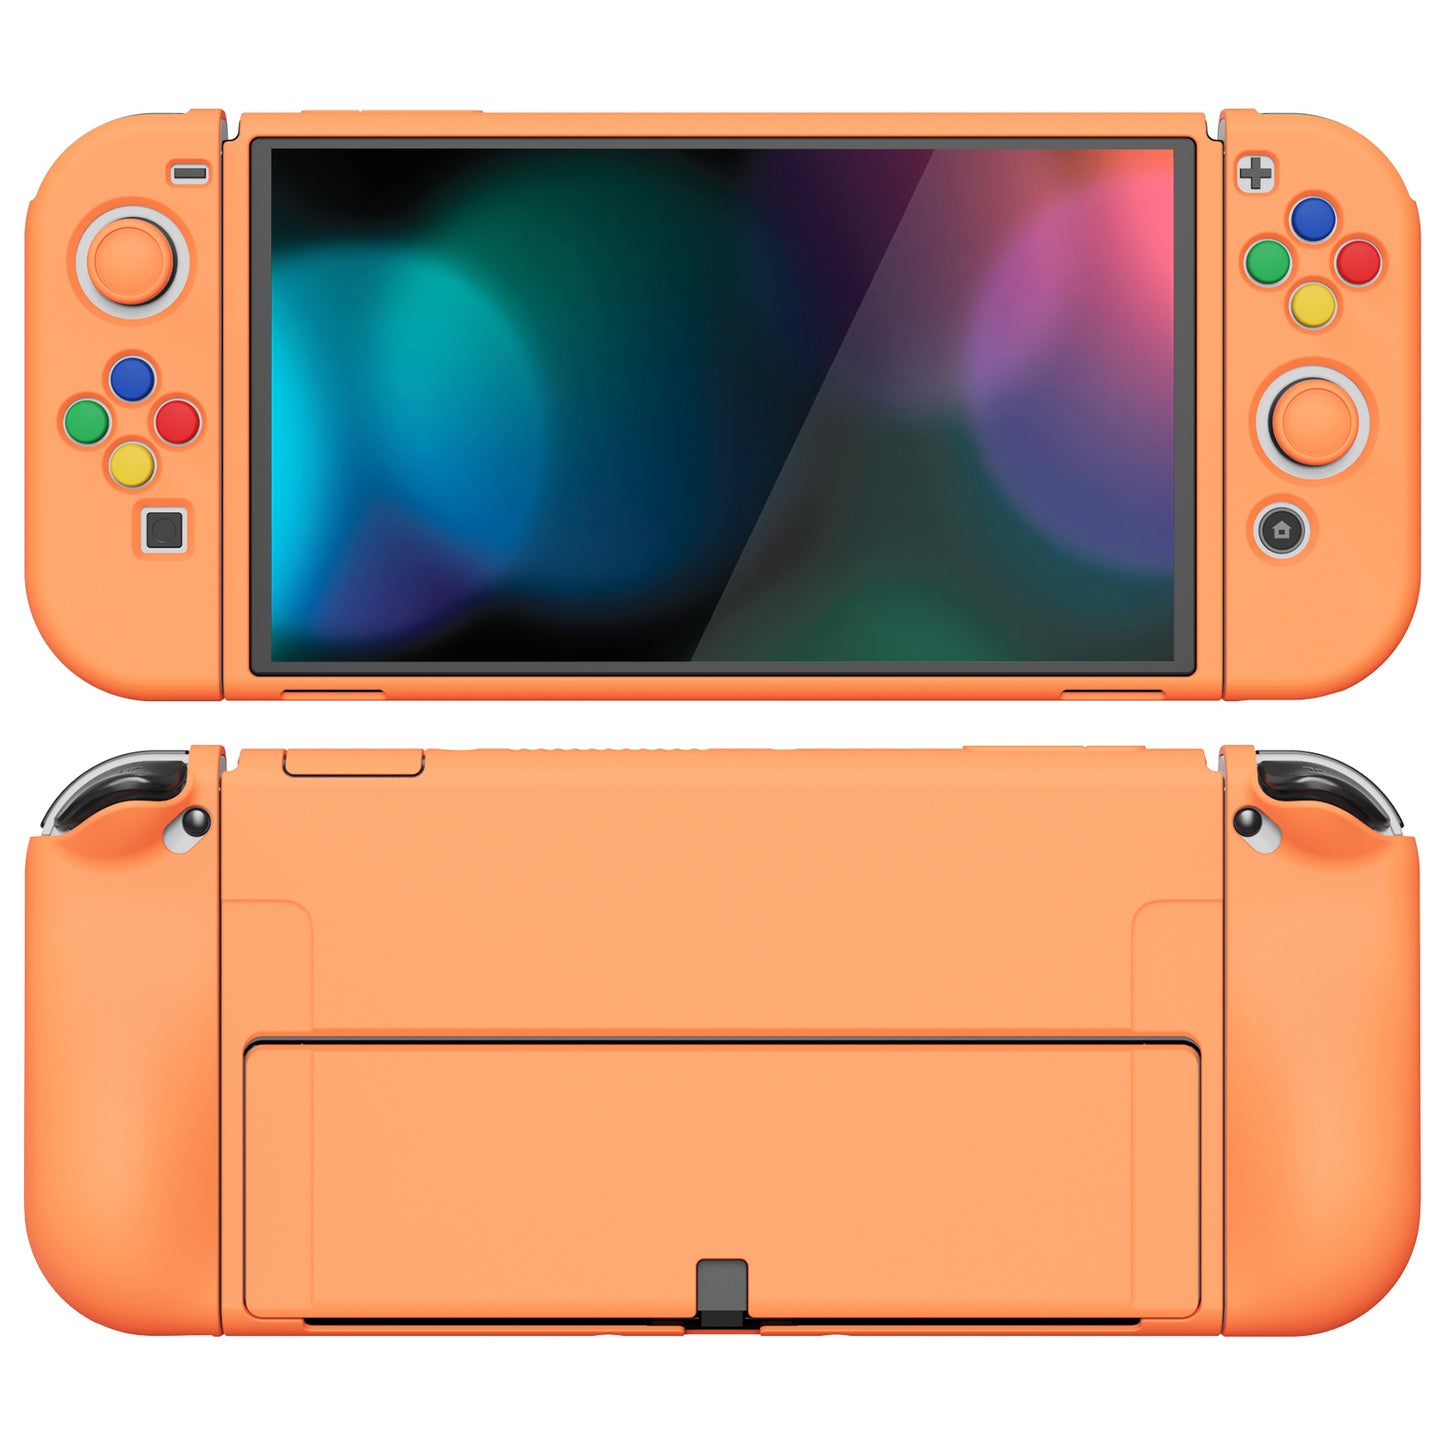 PlayVital ZealProtect Soft Protective Case for Switch OLED, Flexible Protector Cover for Switch OLED with Thumb Grip Caps & ABXY Direction Button Caps - Apricot Yellow - XSOYM5011